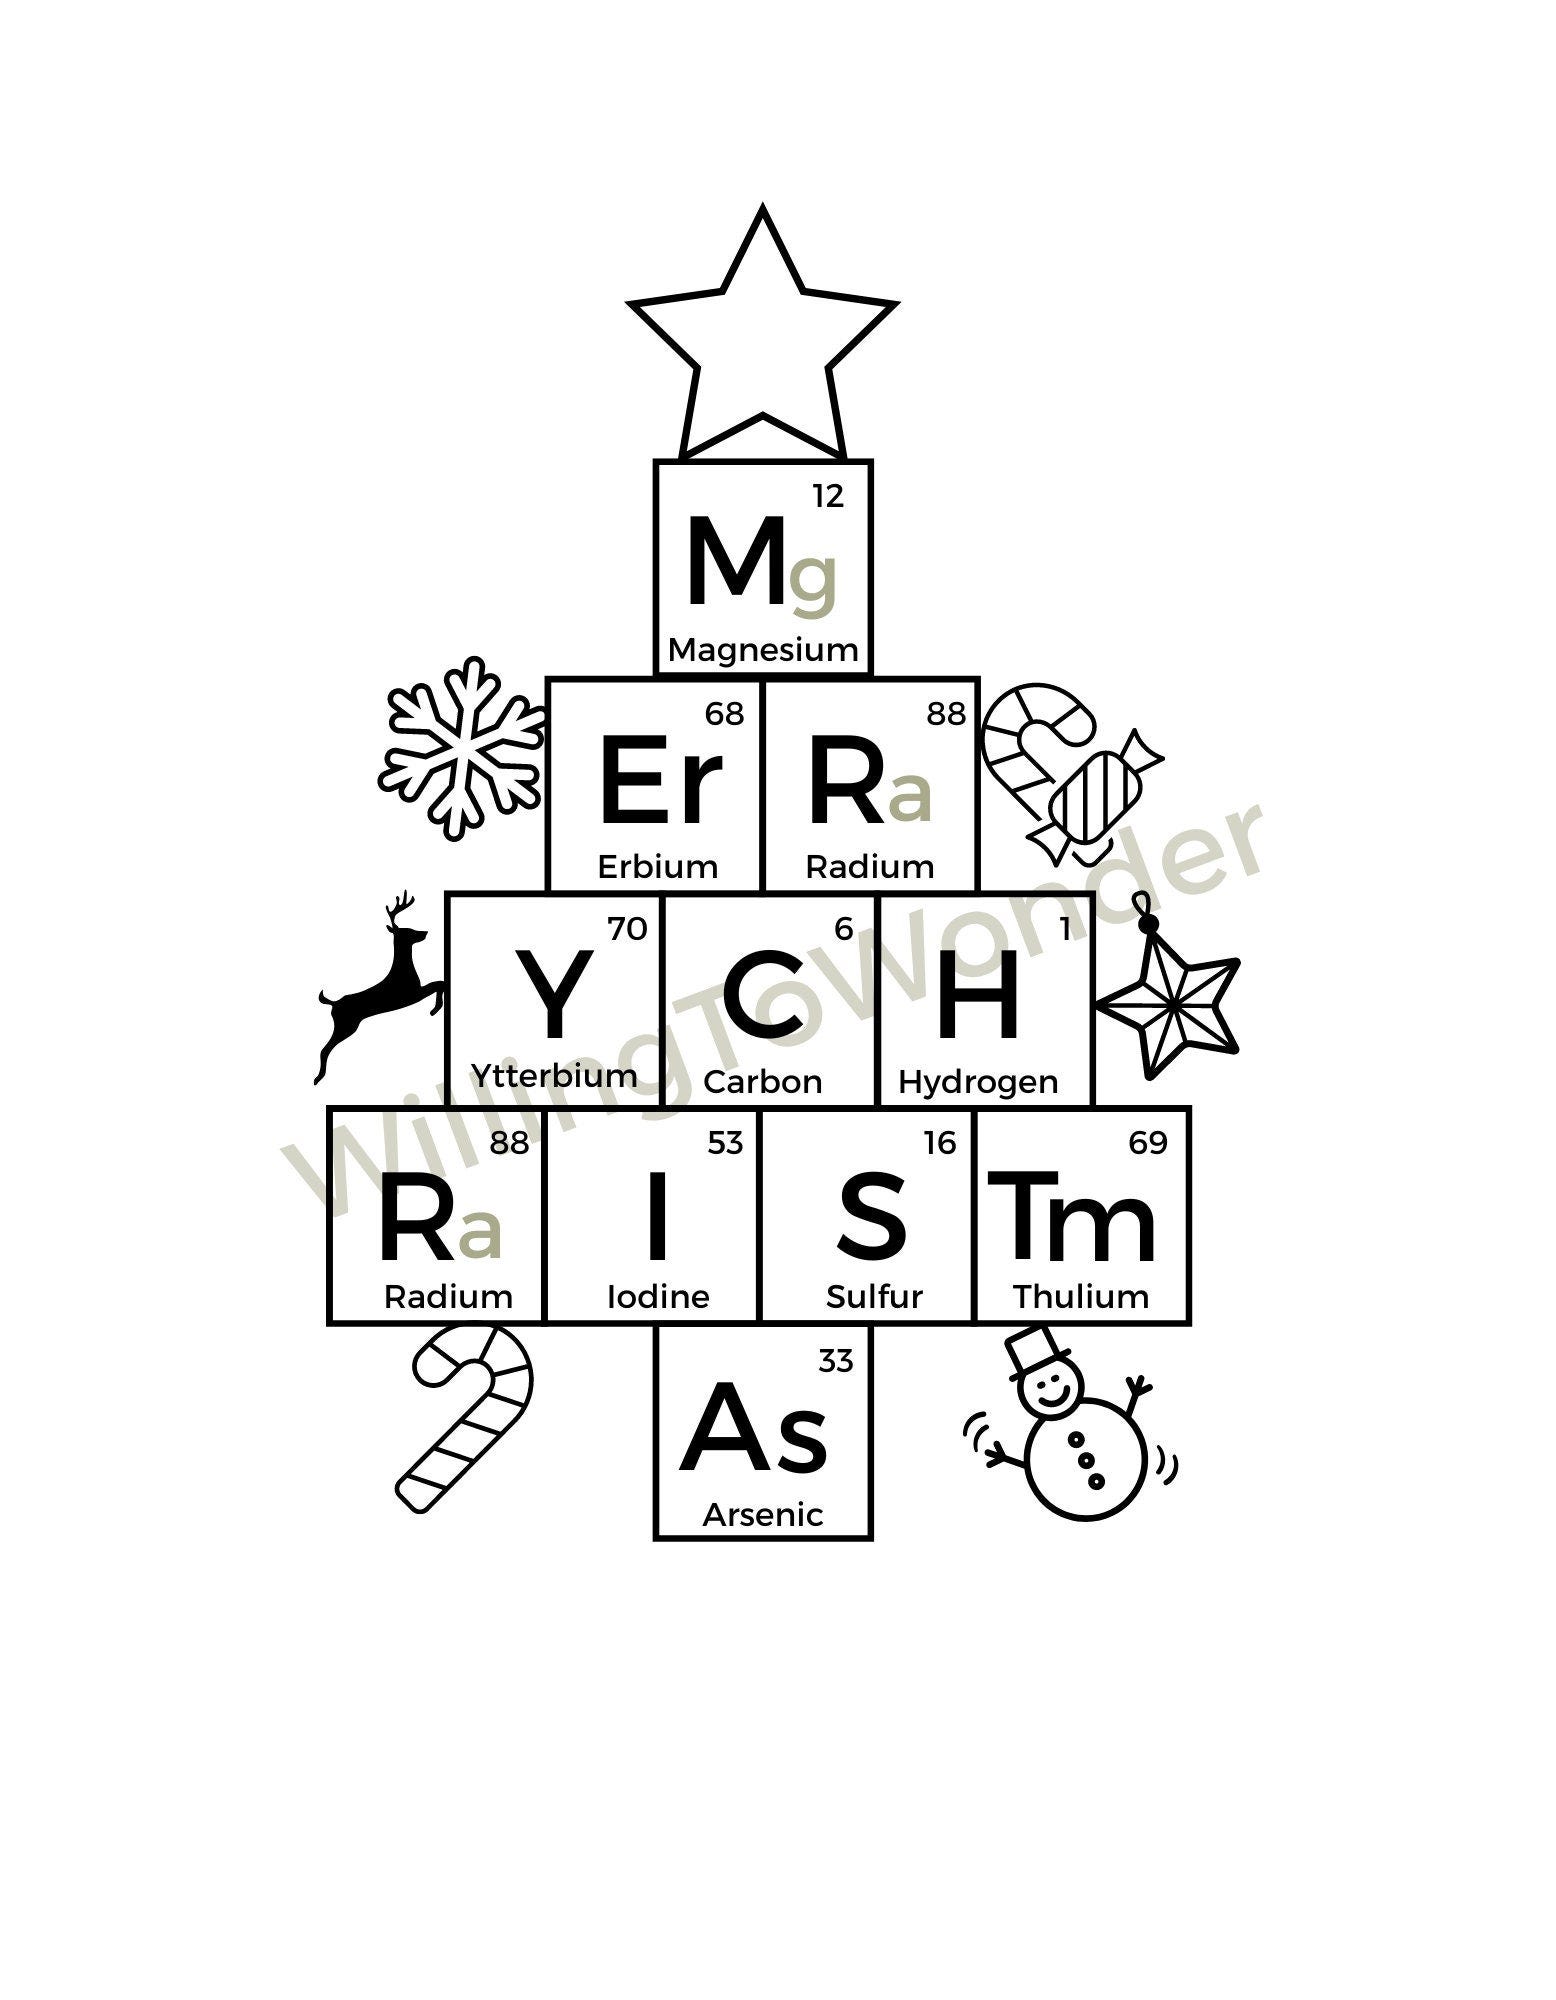 Merry Christmas Tree SVG and ornaments, Science Periodic Table SVG, STEM svg